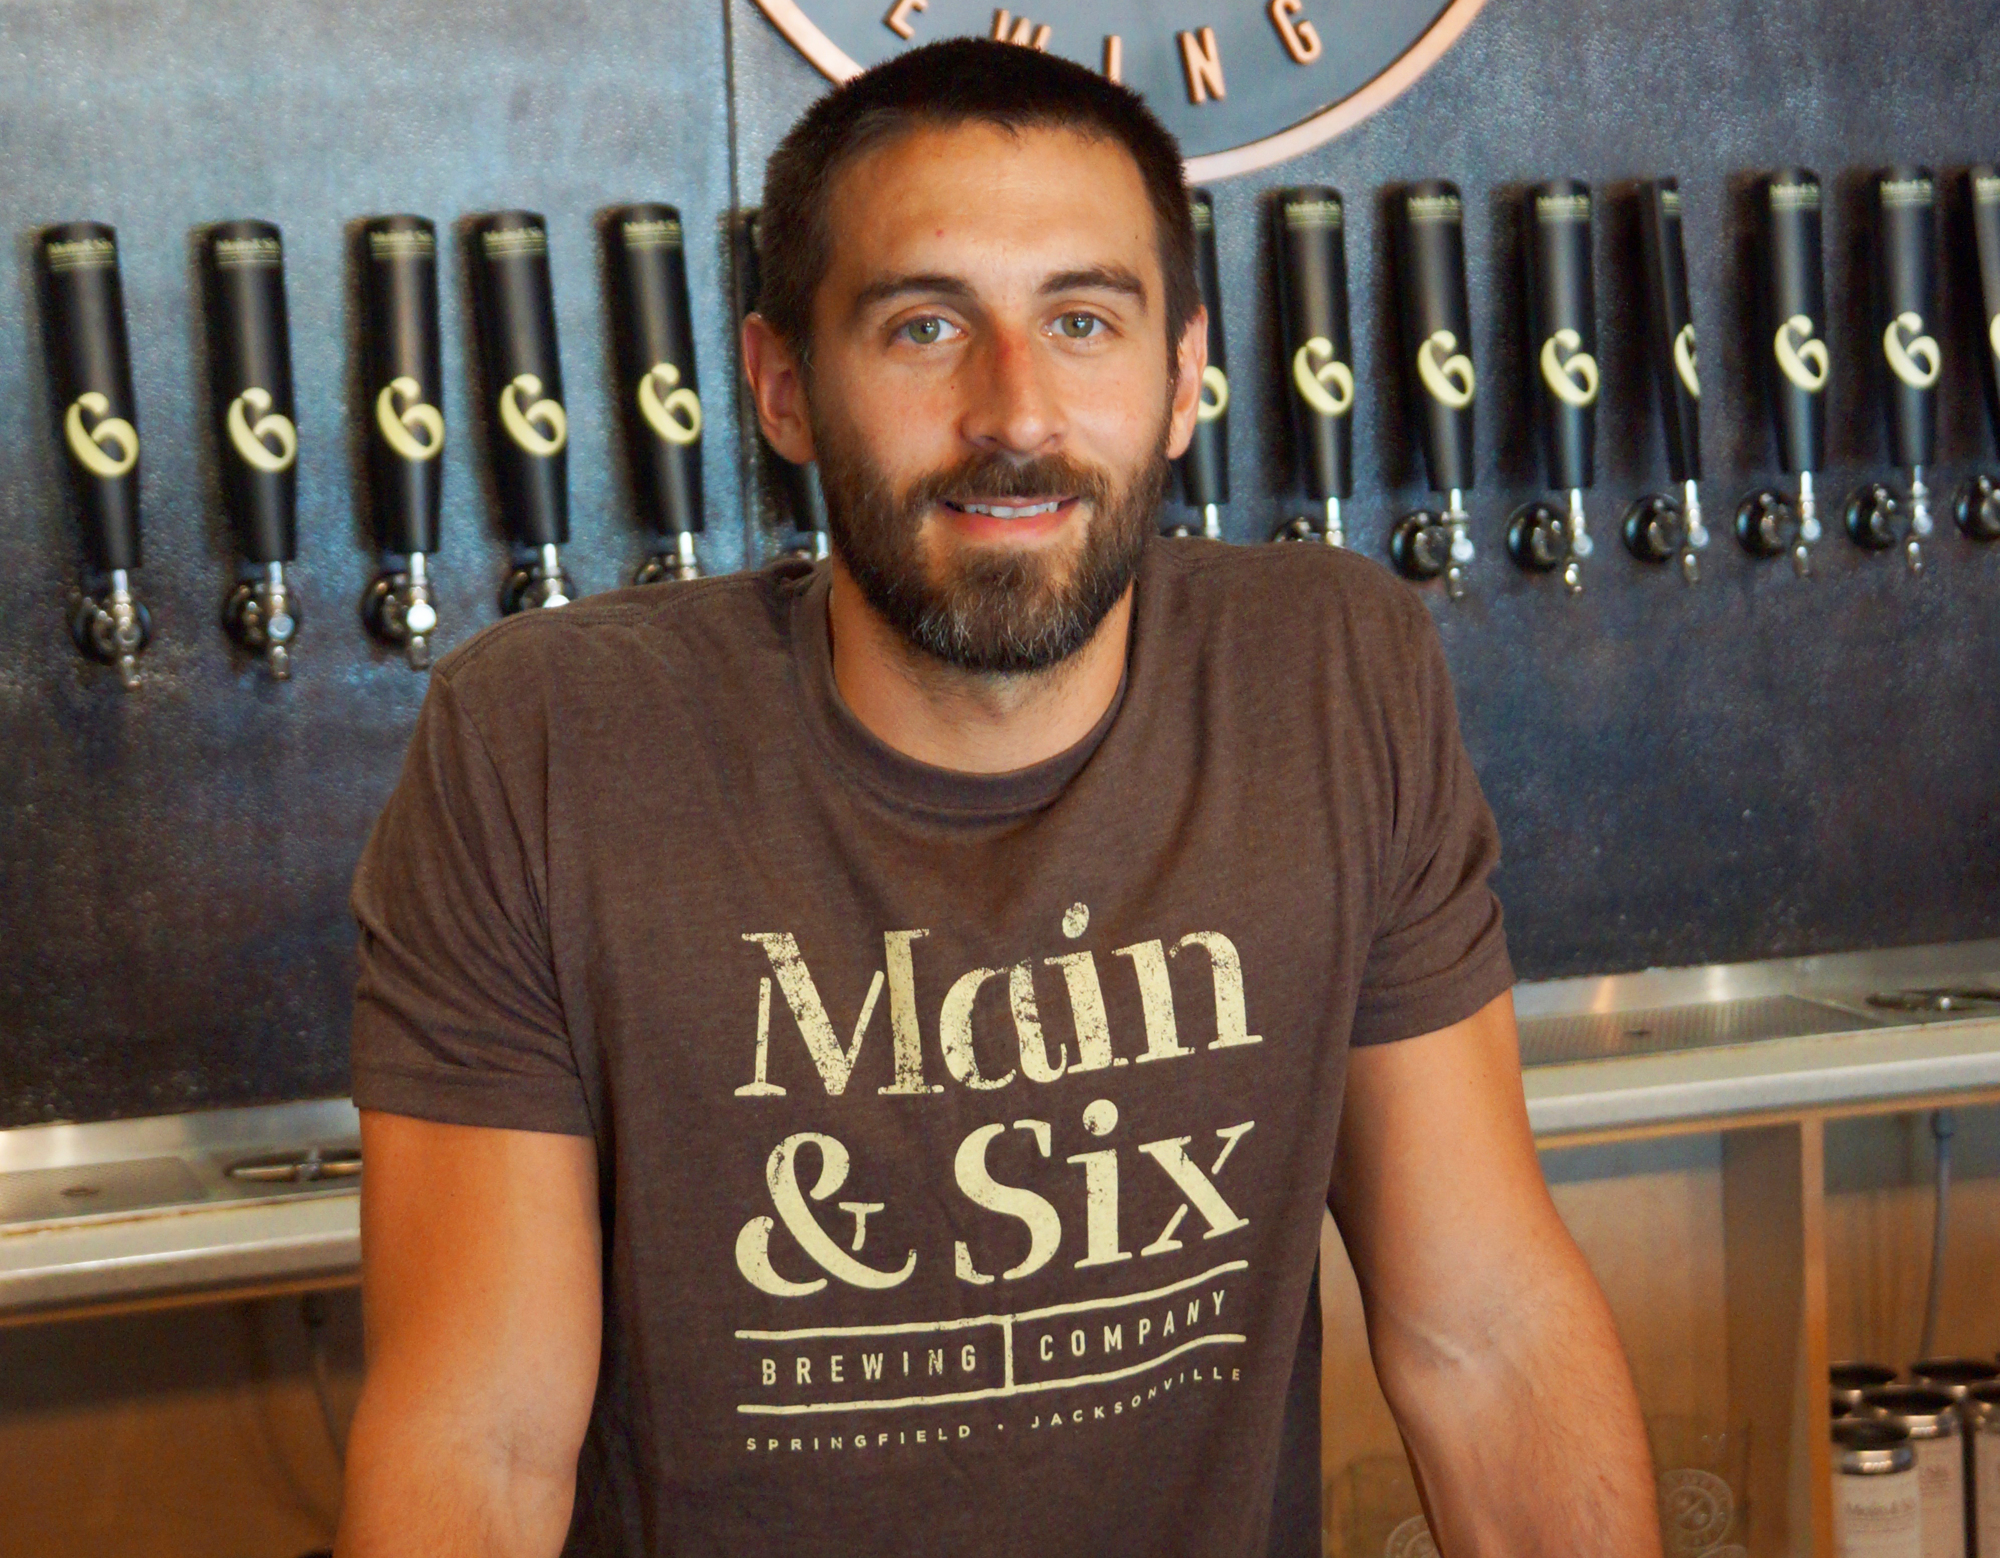 Dennis Espinosa and his mother, Cindy Lasky, opened Main & Six Brewing Co. at 1636 N. Main St. in Springfield in 2017.